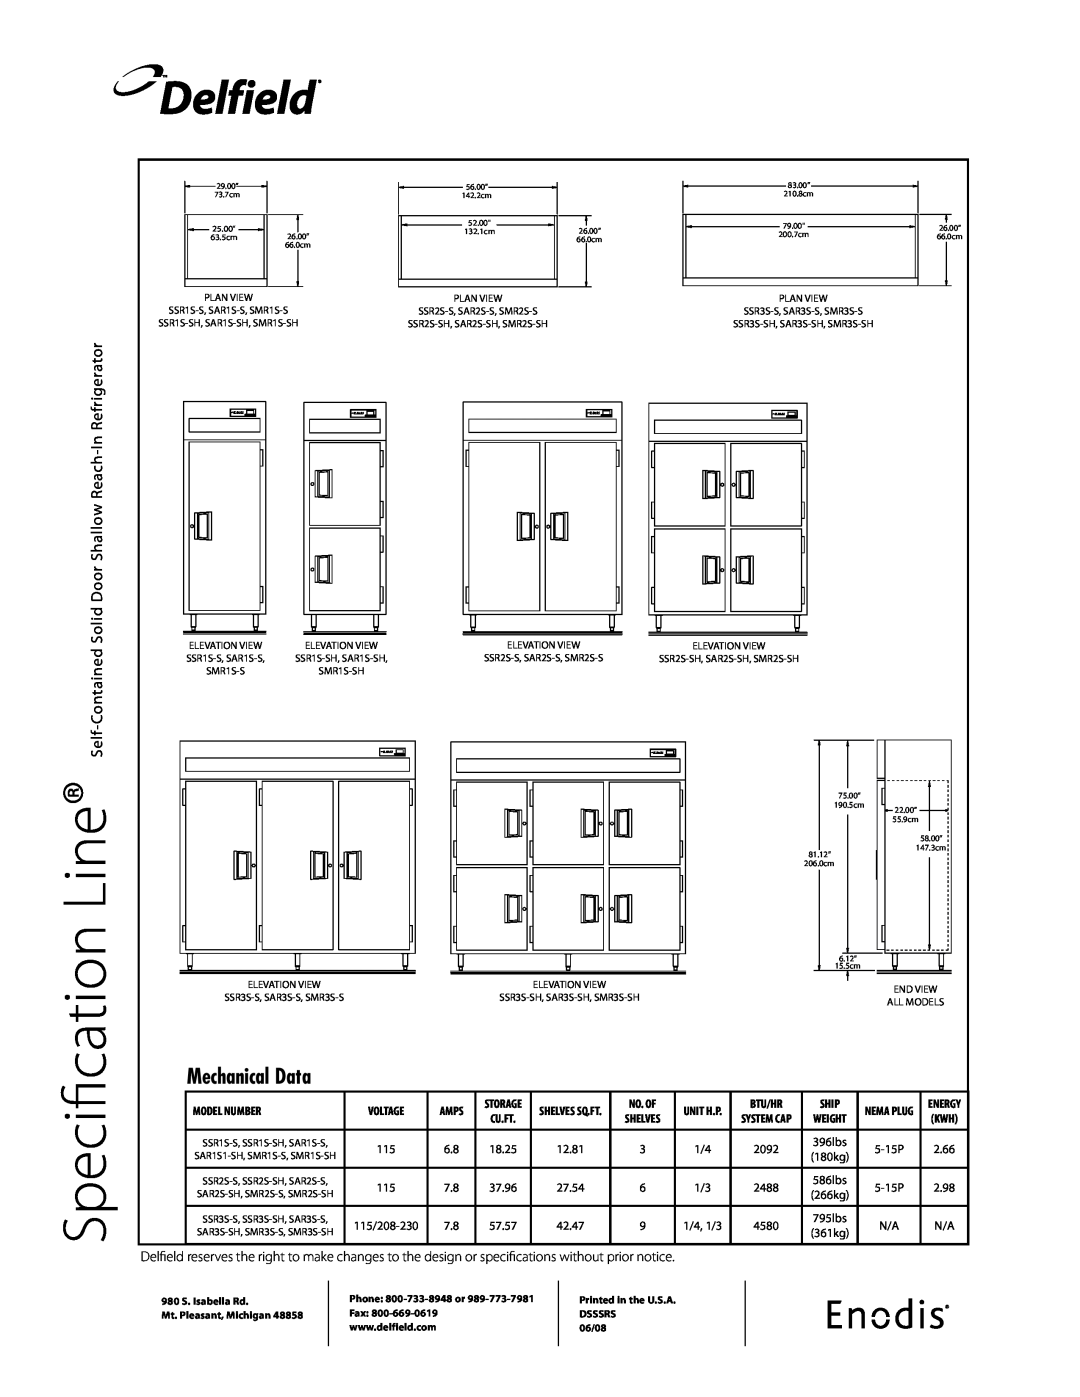 Delfield SARS Delfield, Specification, Mechanical Data, Line Self-Contained Solid Door Shallow Reach-In Refrigerator, Amps 